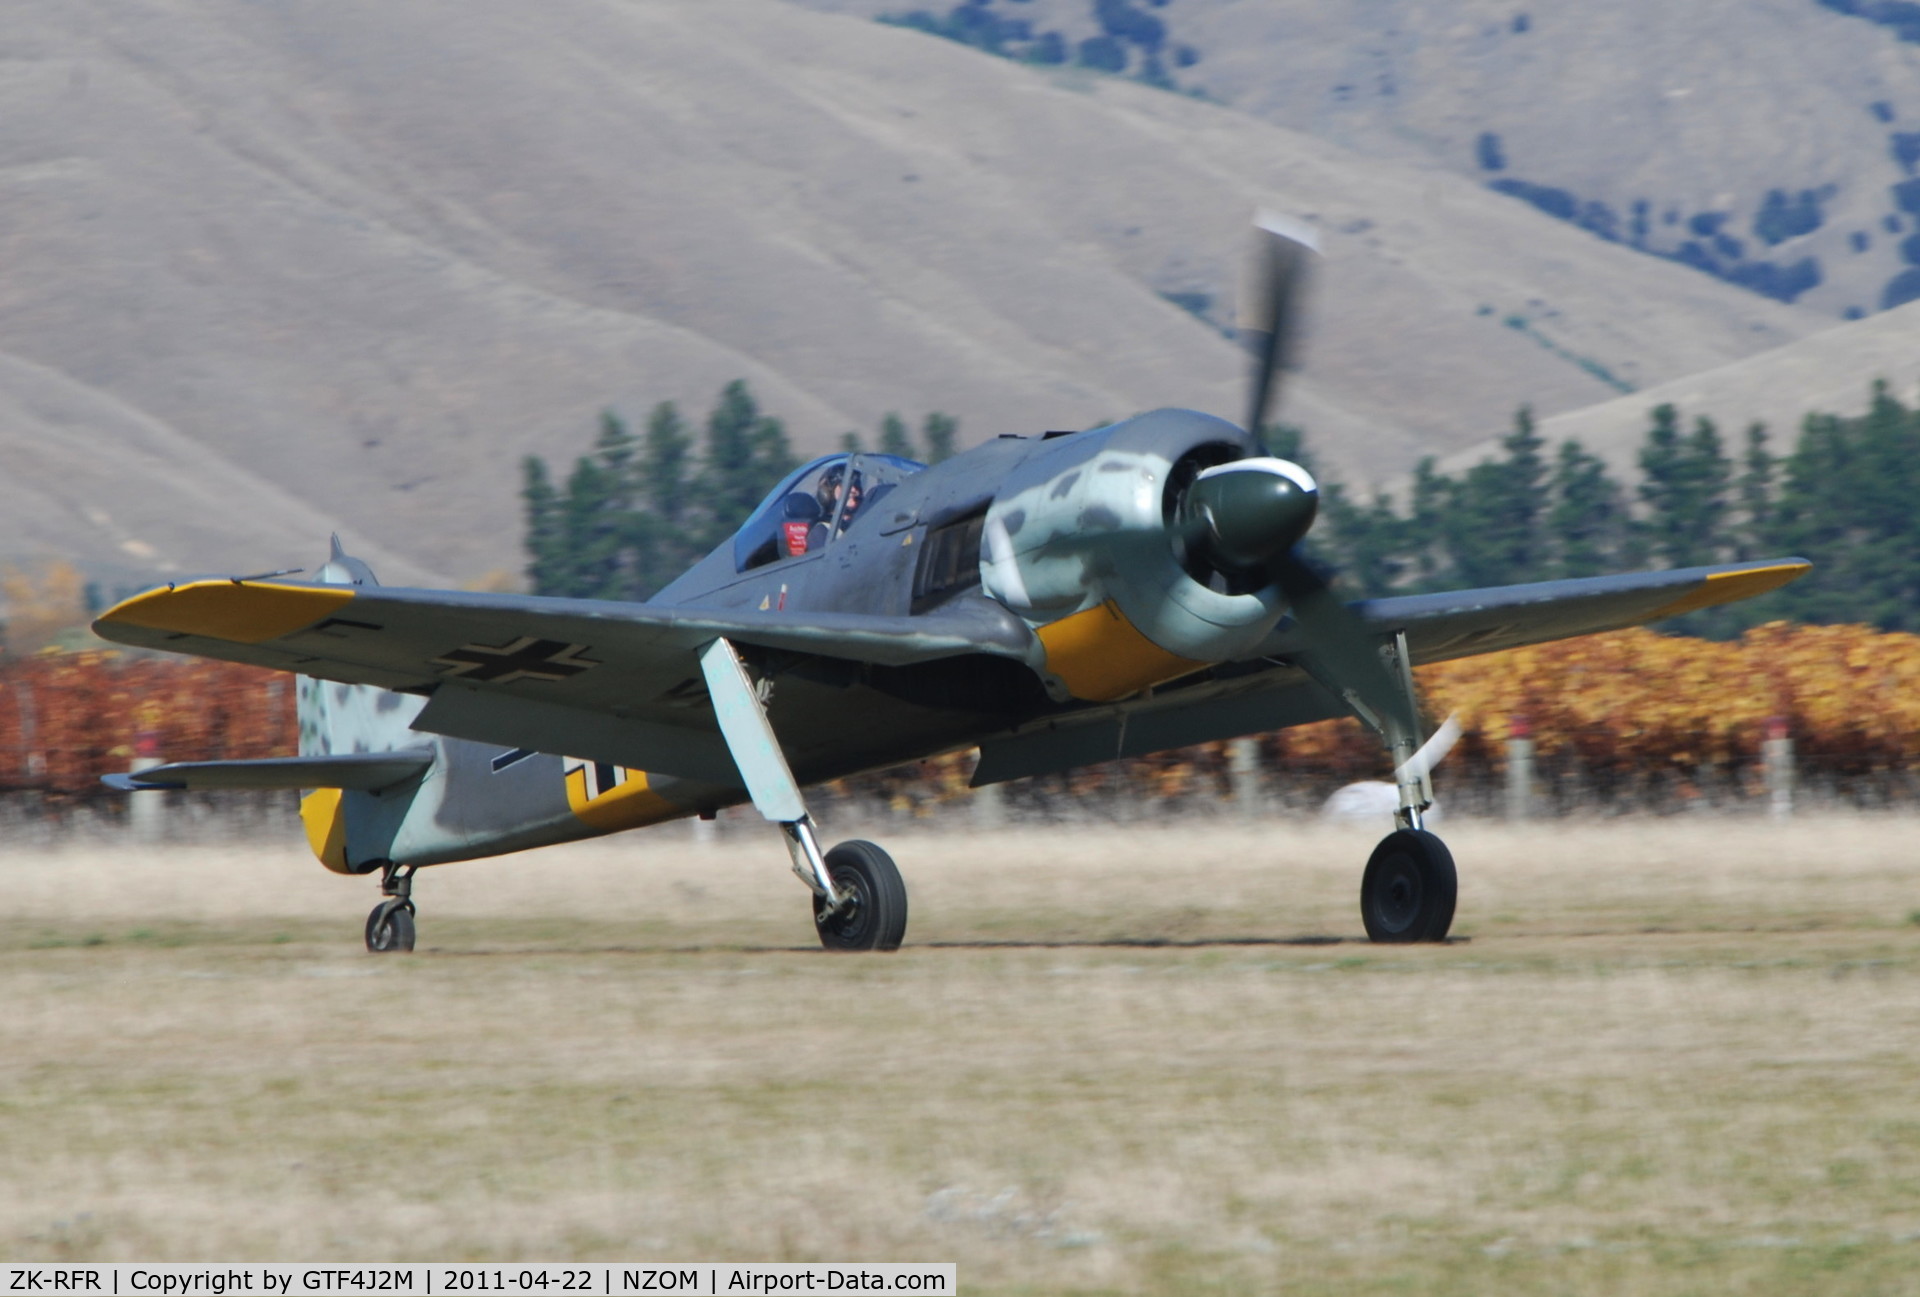 ZK-RFR, 2004 Flugwerk Fw 190-A8/N Replica C/N 990001, ZK-RFR takes off for the practise day at the Omaka airshow 22.4.11